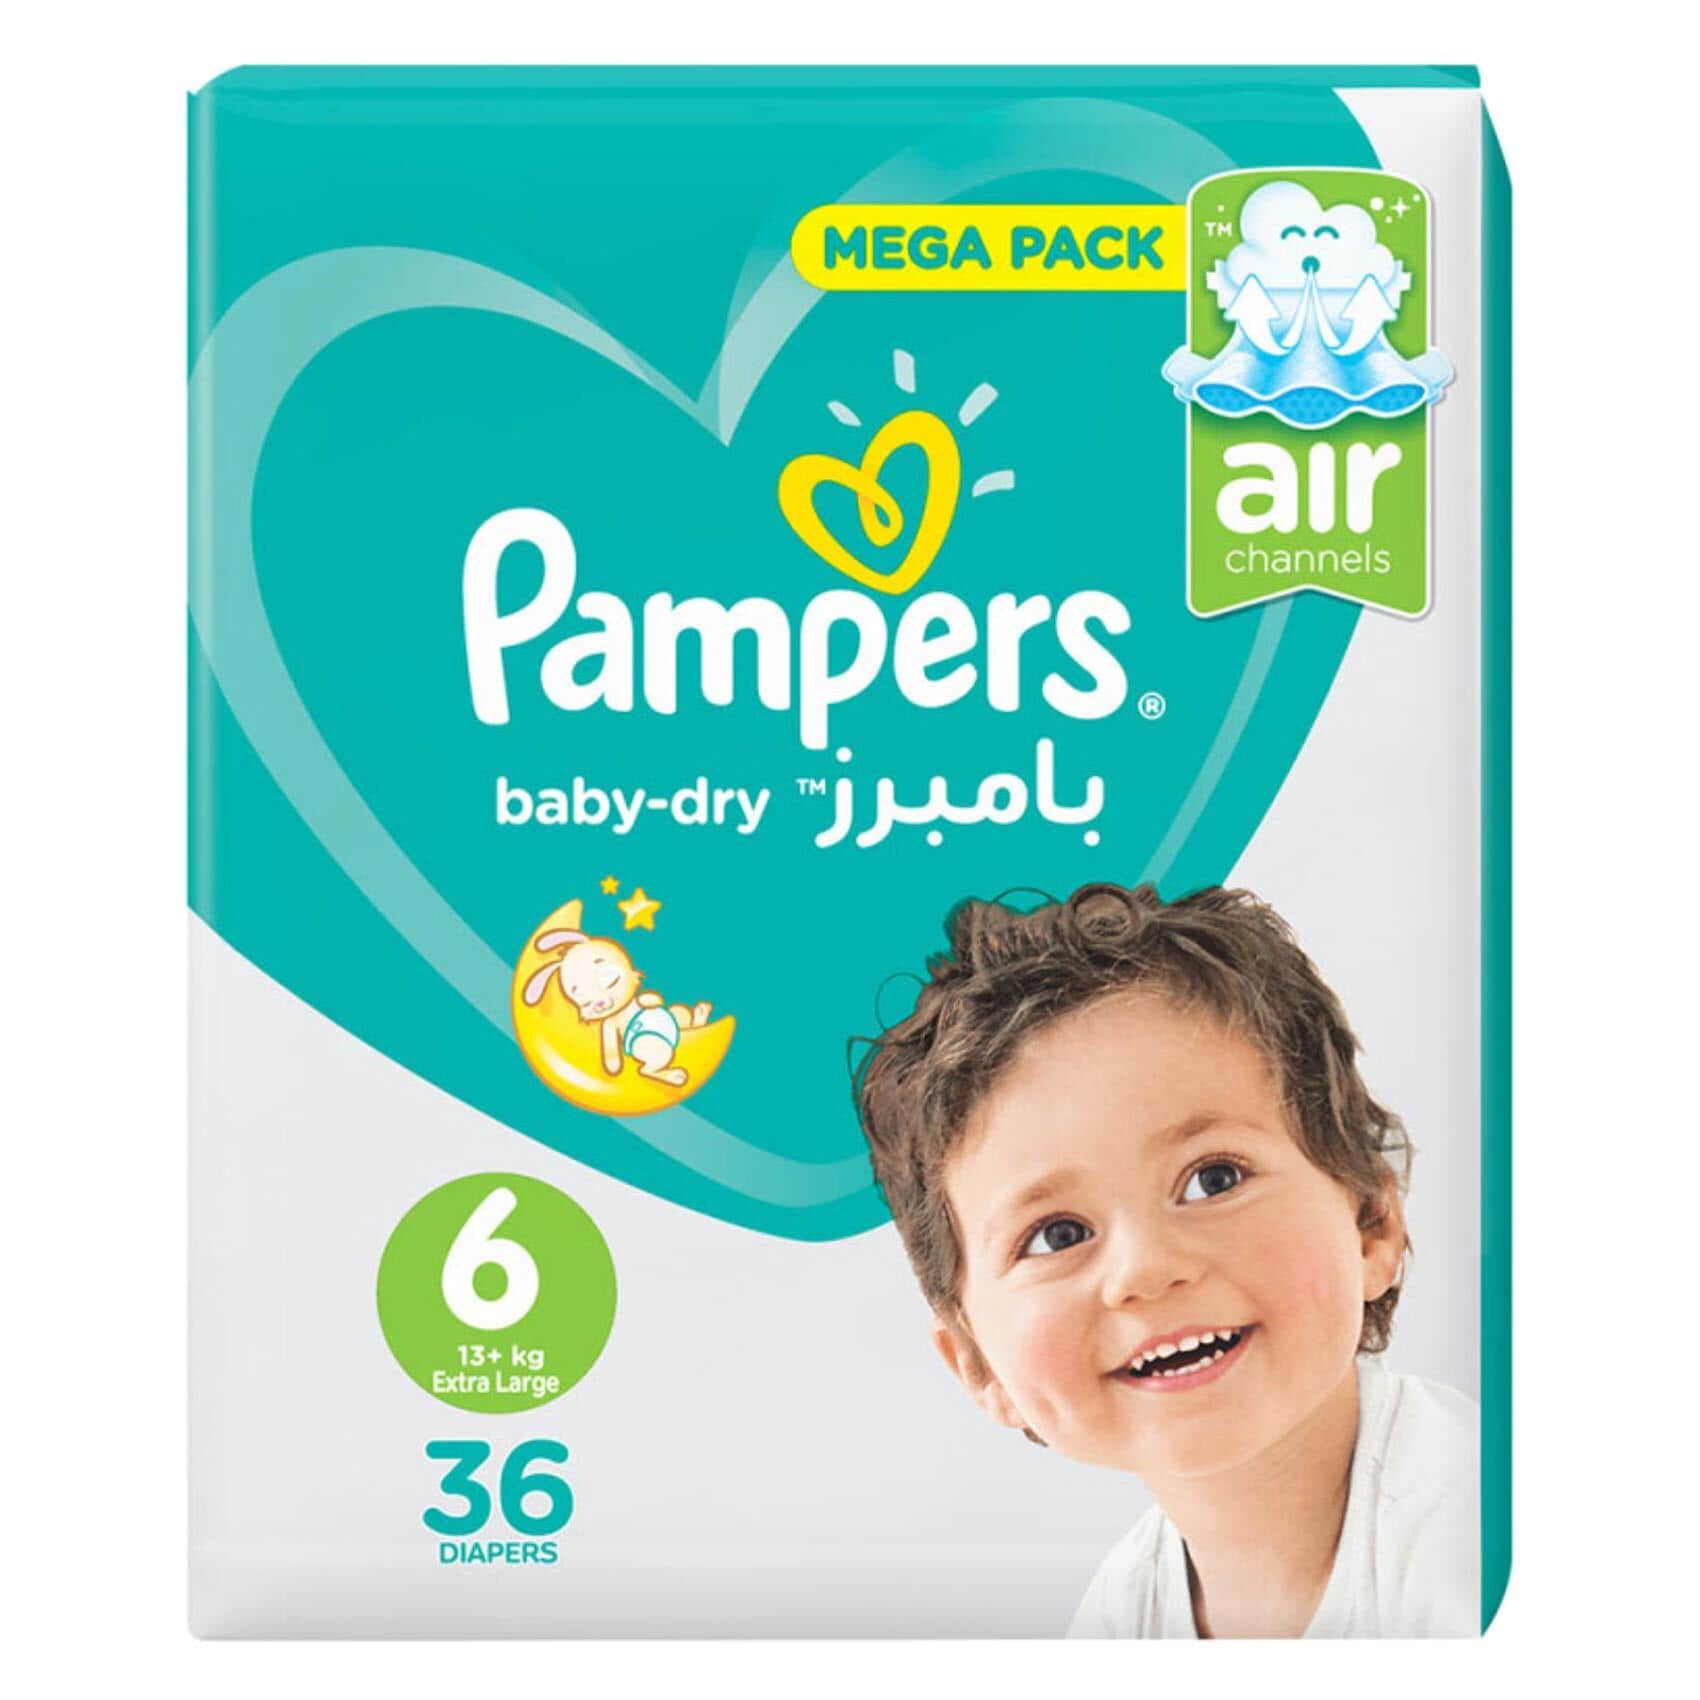 Pampers - Bébé Dry - Taille 6 - Mega Pack - 70 couches